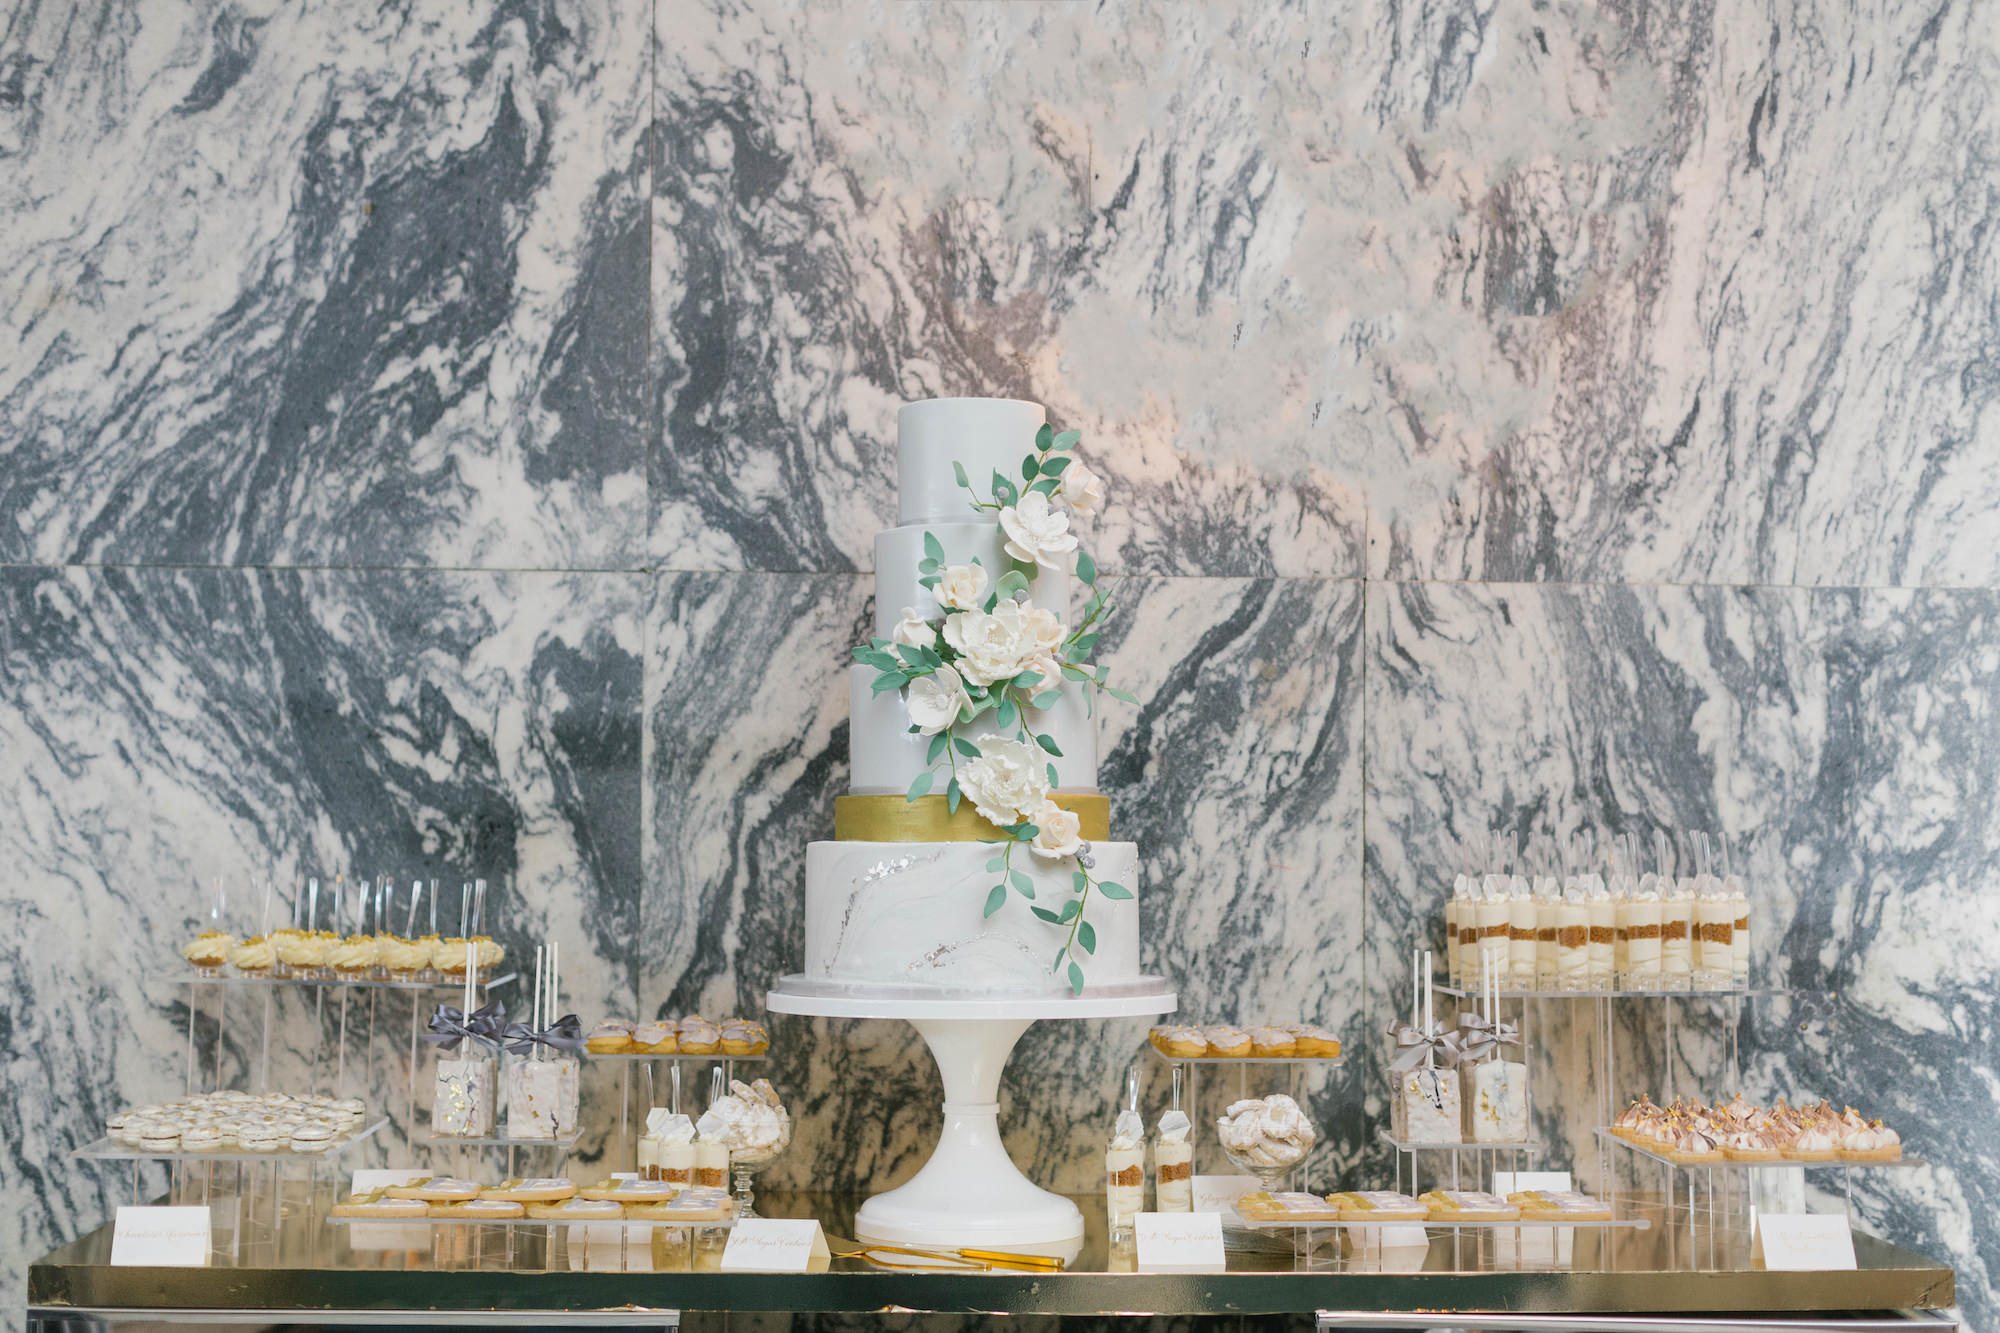 Elegant Four Tier White, Gold and Silver Wedding Cake with Cascading White and Greenery Florals on Dessert Table with Marble Background | Tampa Historic Courthouse Hotel Wedding Venue Le Meridien